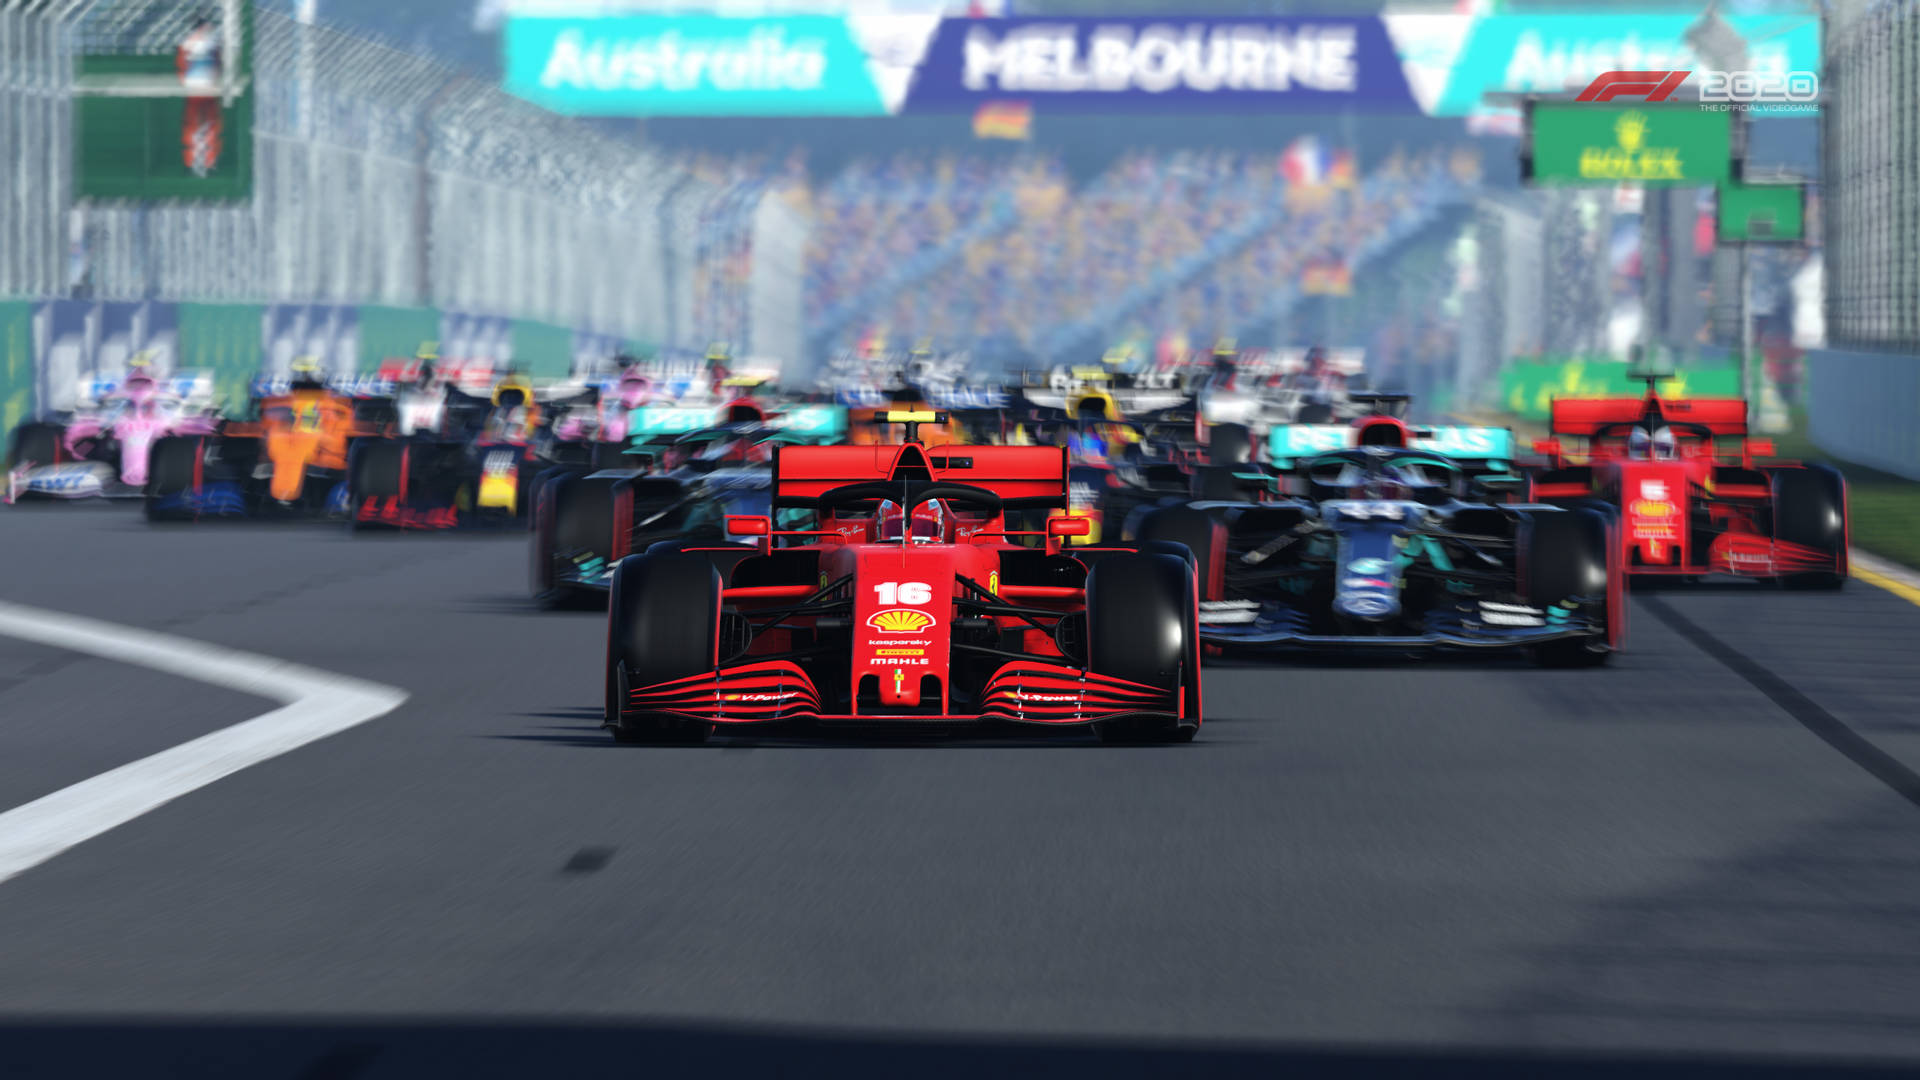 A Race Track With Many Cars Racing In Front Of A Crowd Wallpaper